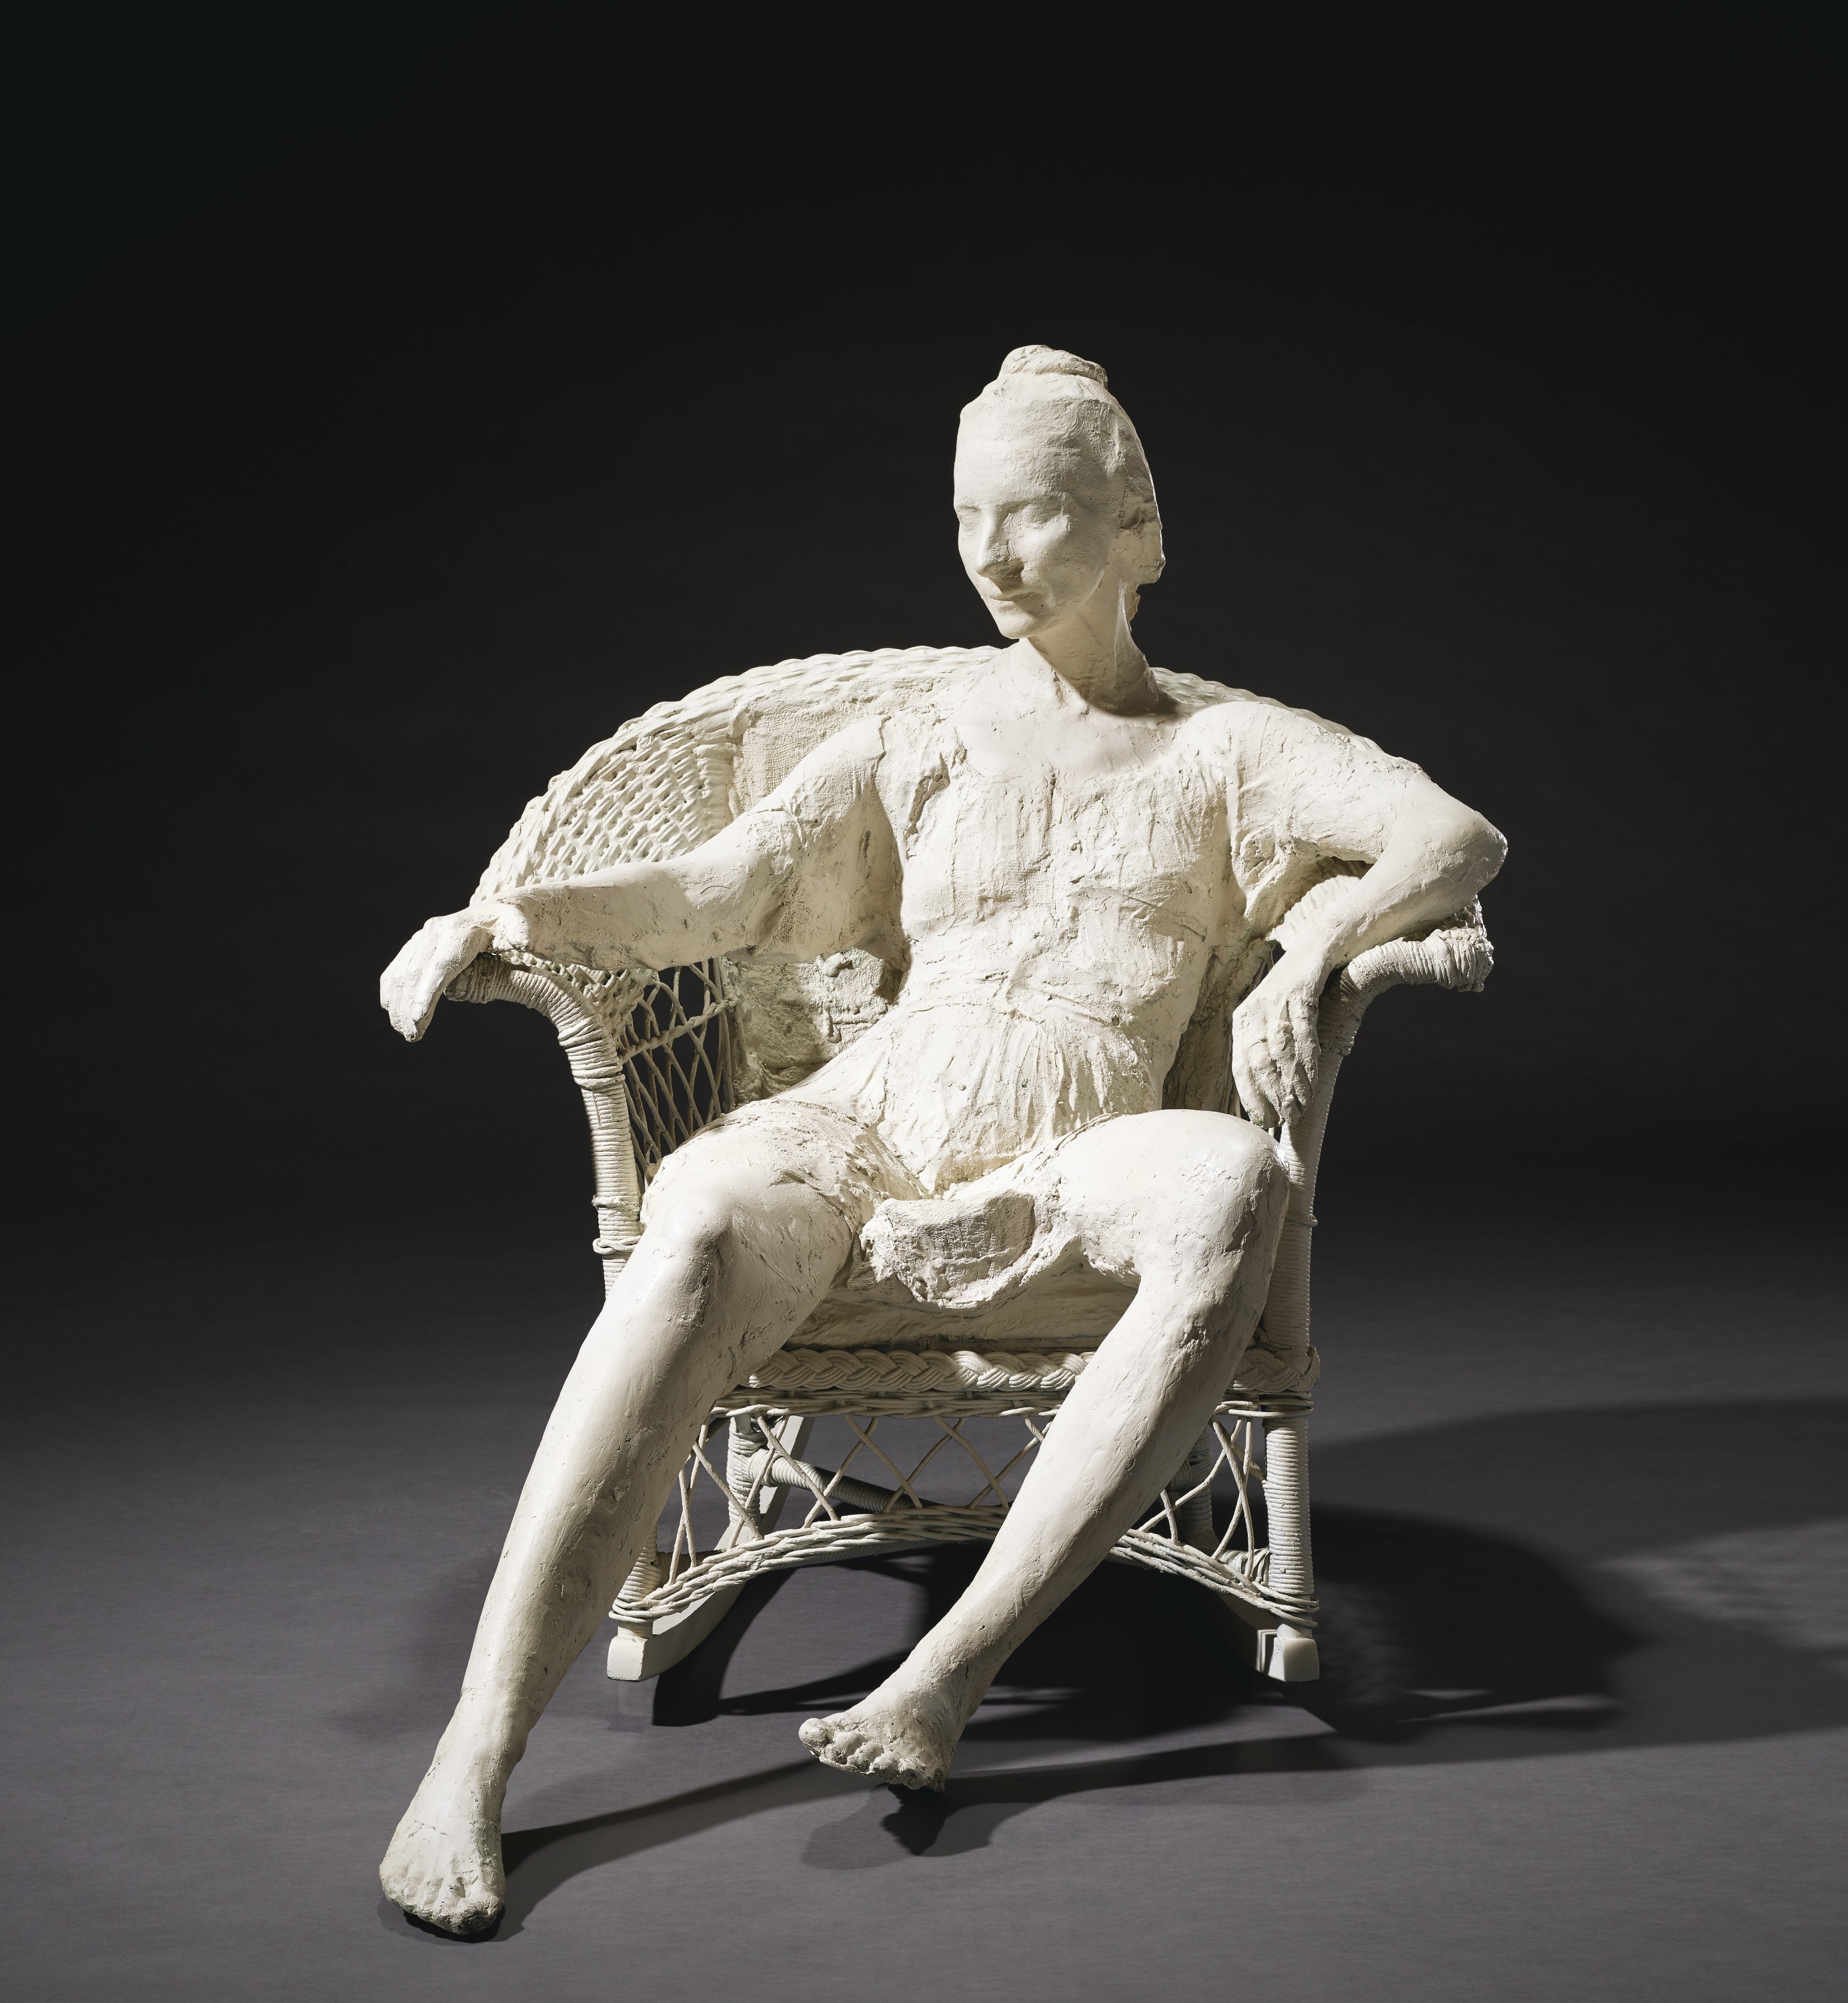 Artwork by George Segal, Woman on White Wicker Rocker, Made of bronze with white patina